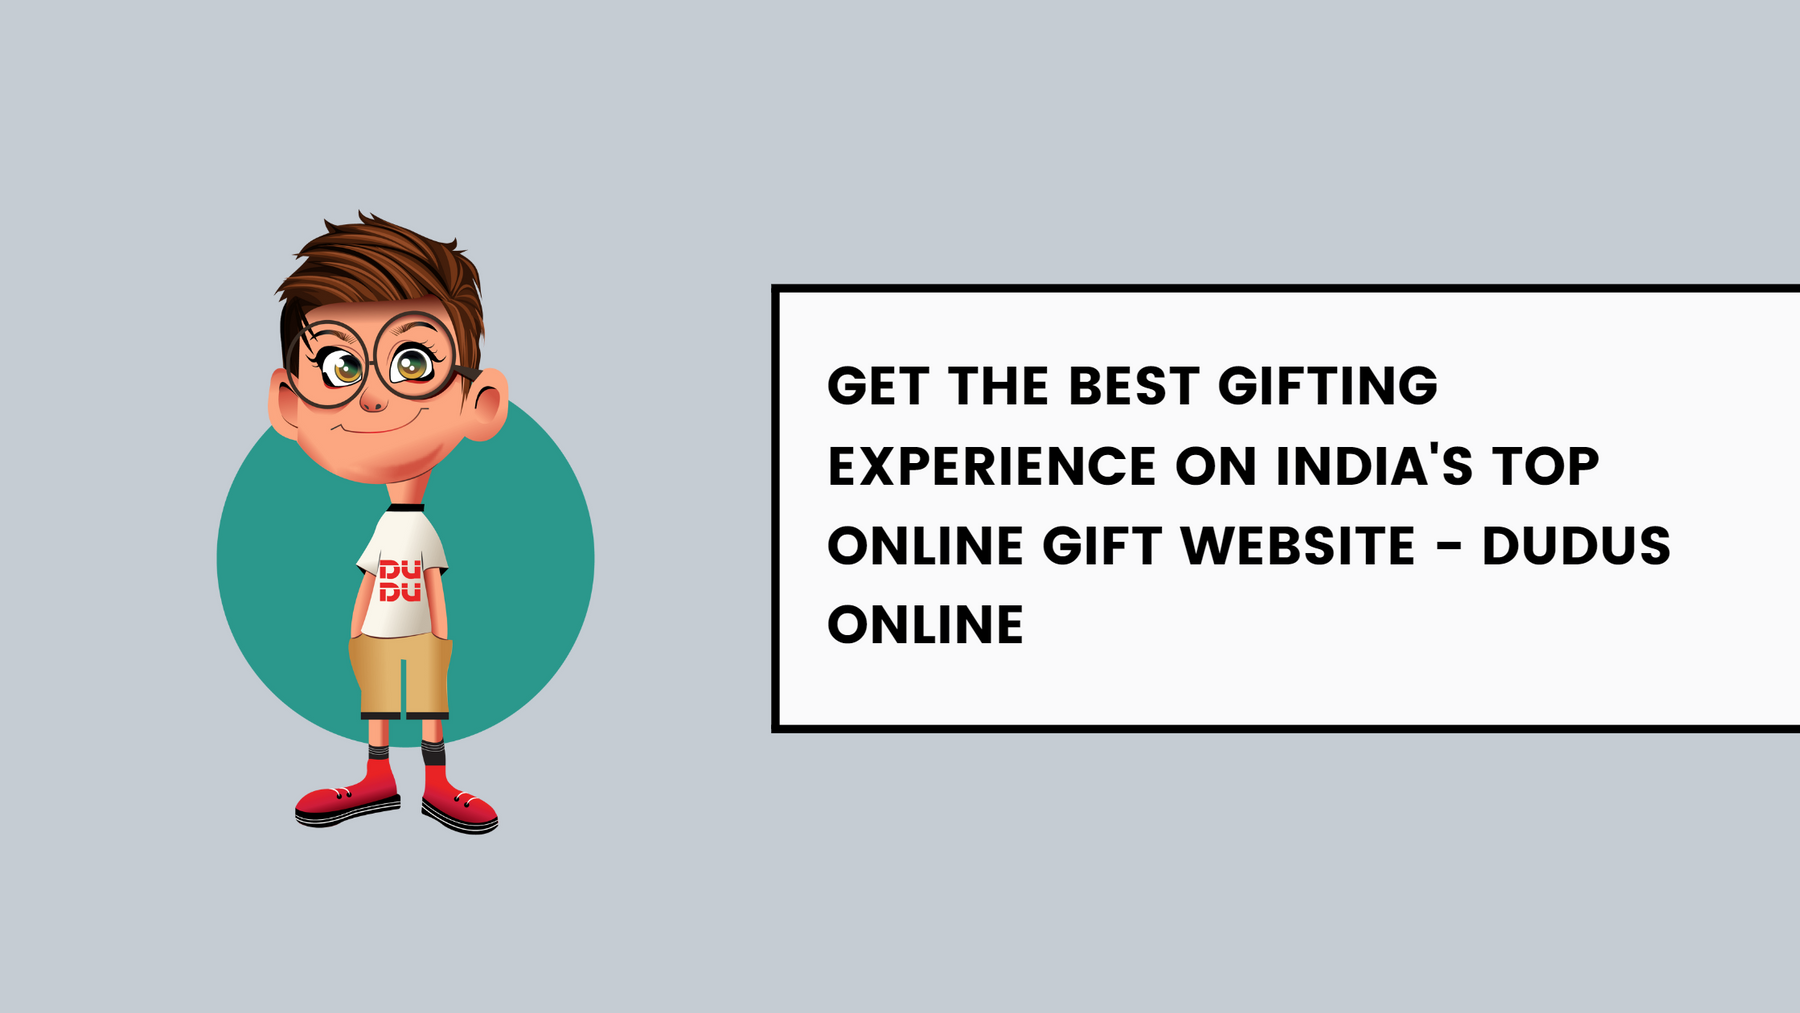 Get The Best Gifting Experience On India's Top Online Gift Website - Dudus Online